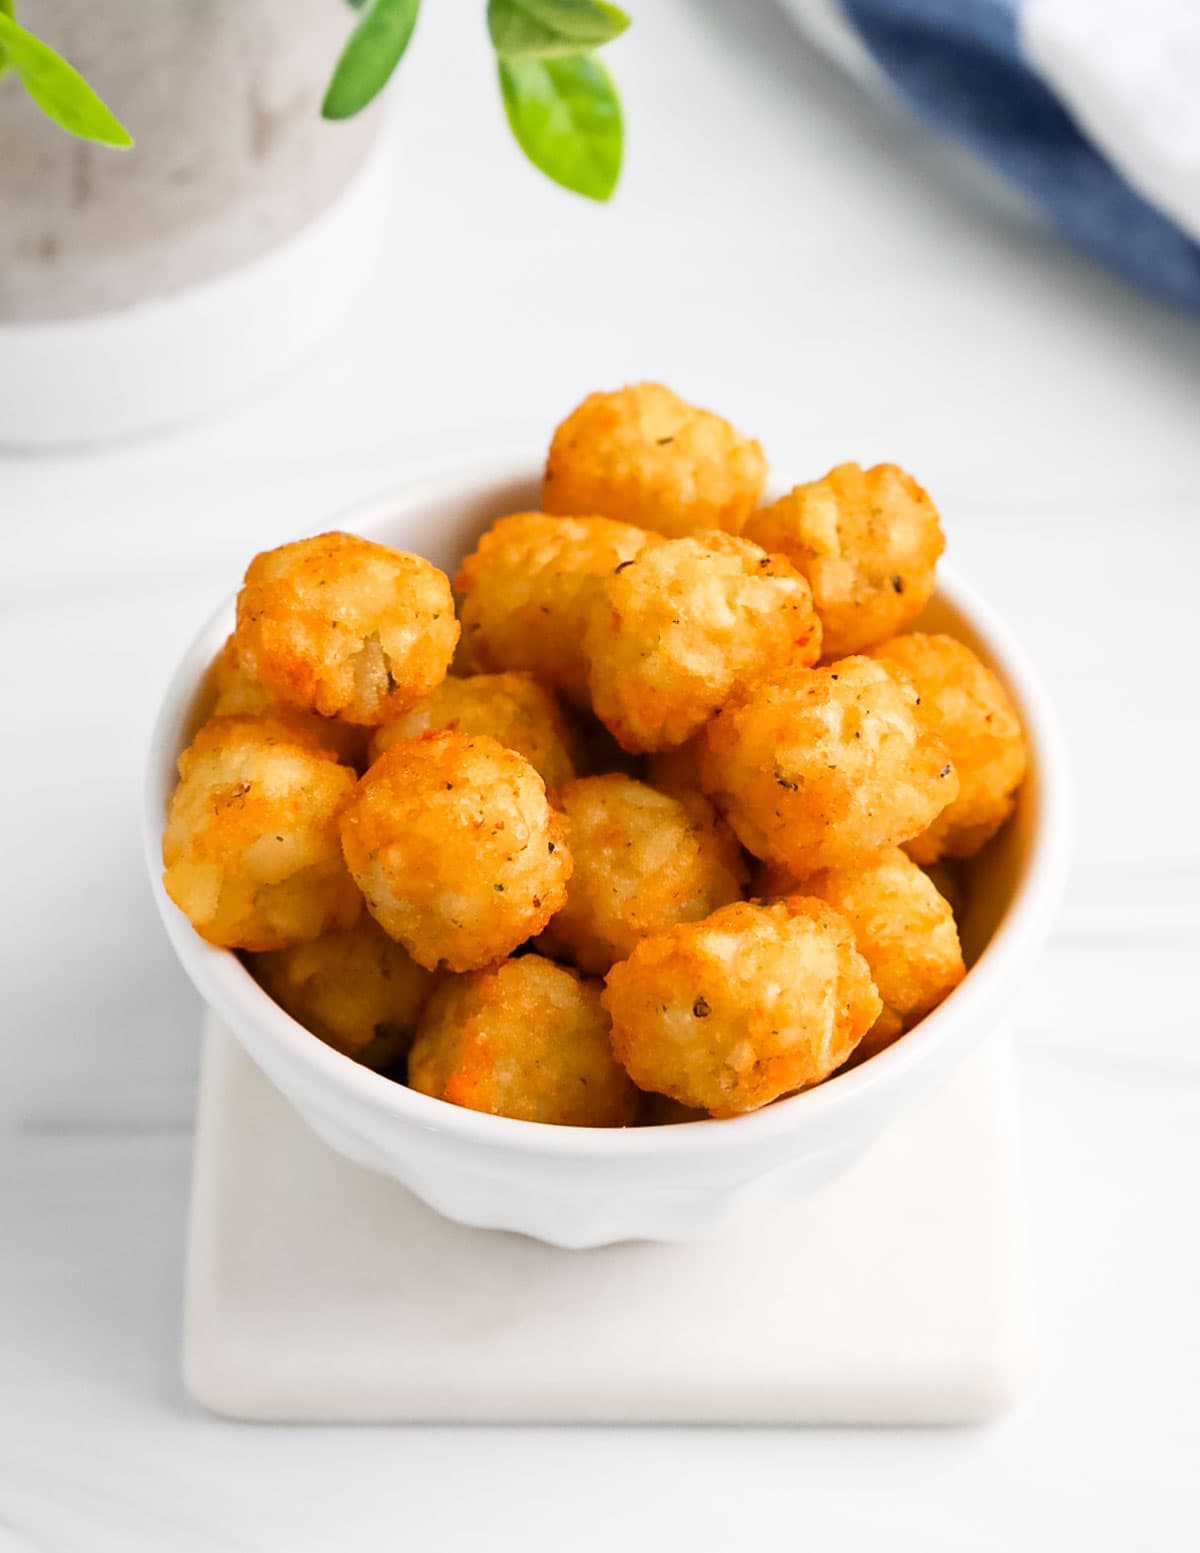 A small white dish filled with crispy tater tots.